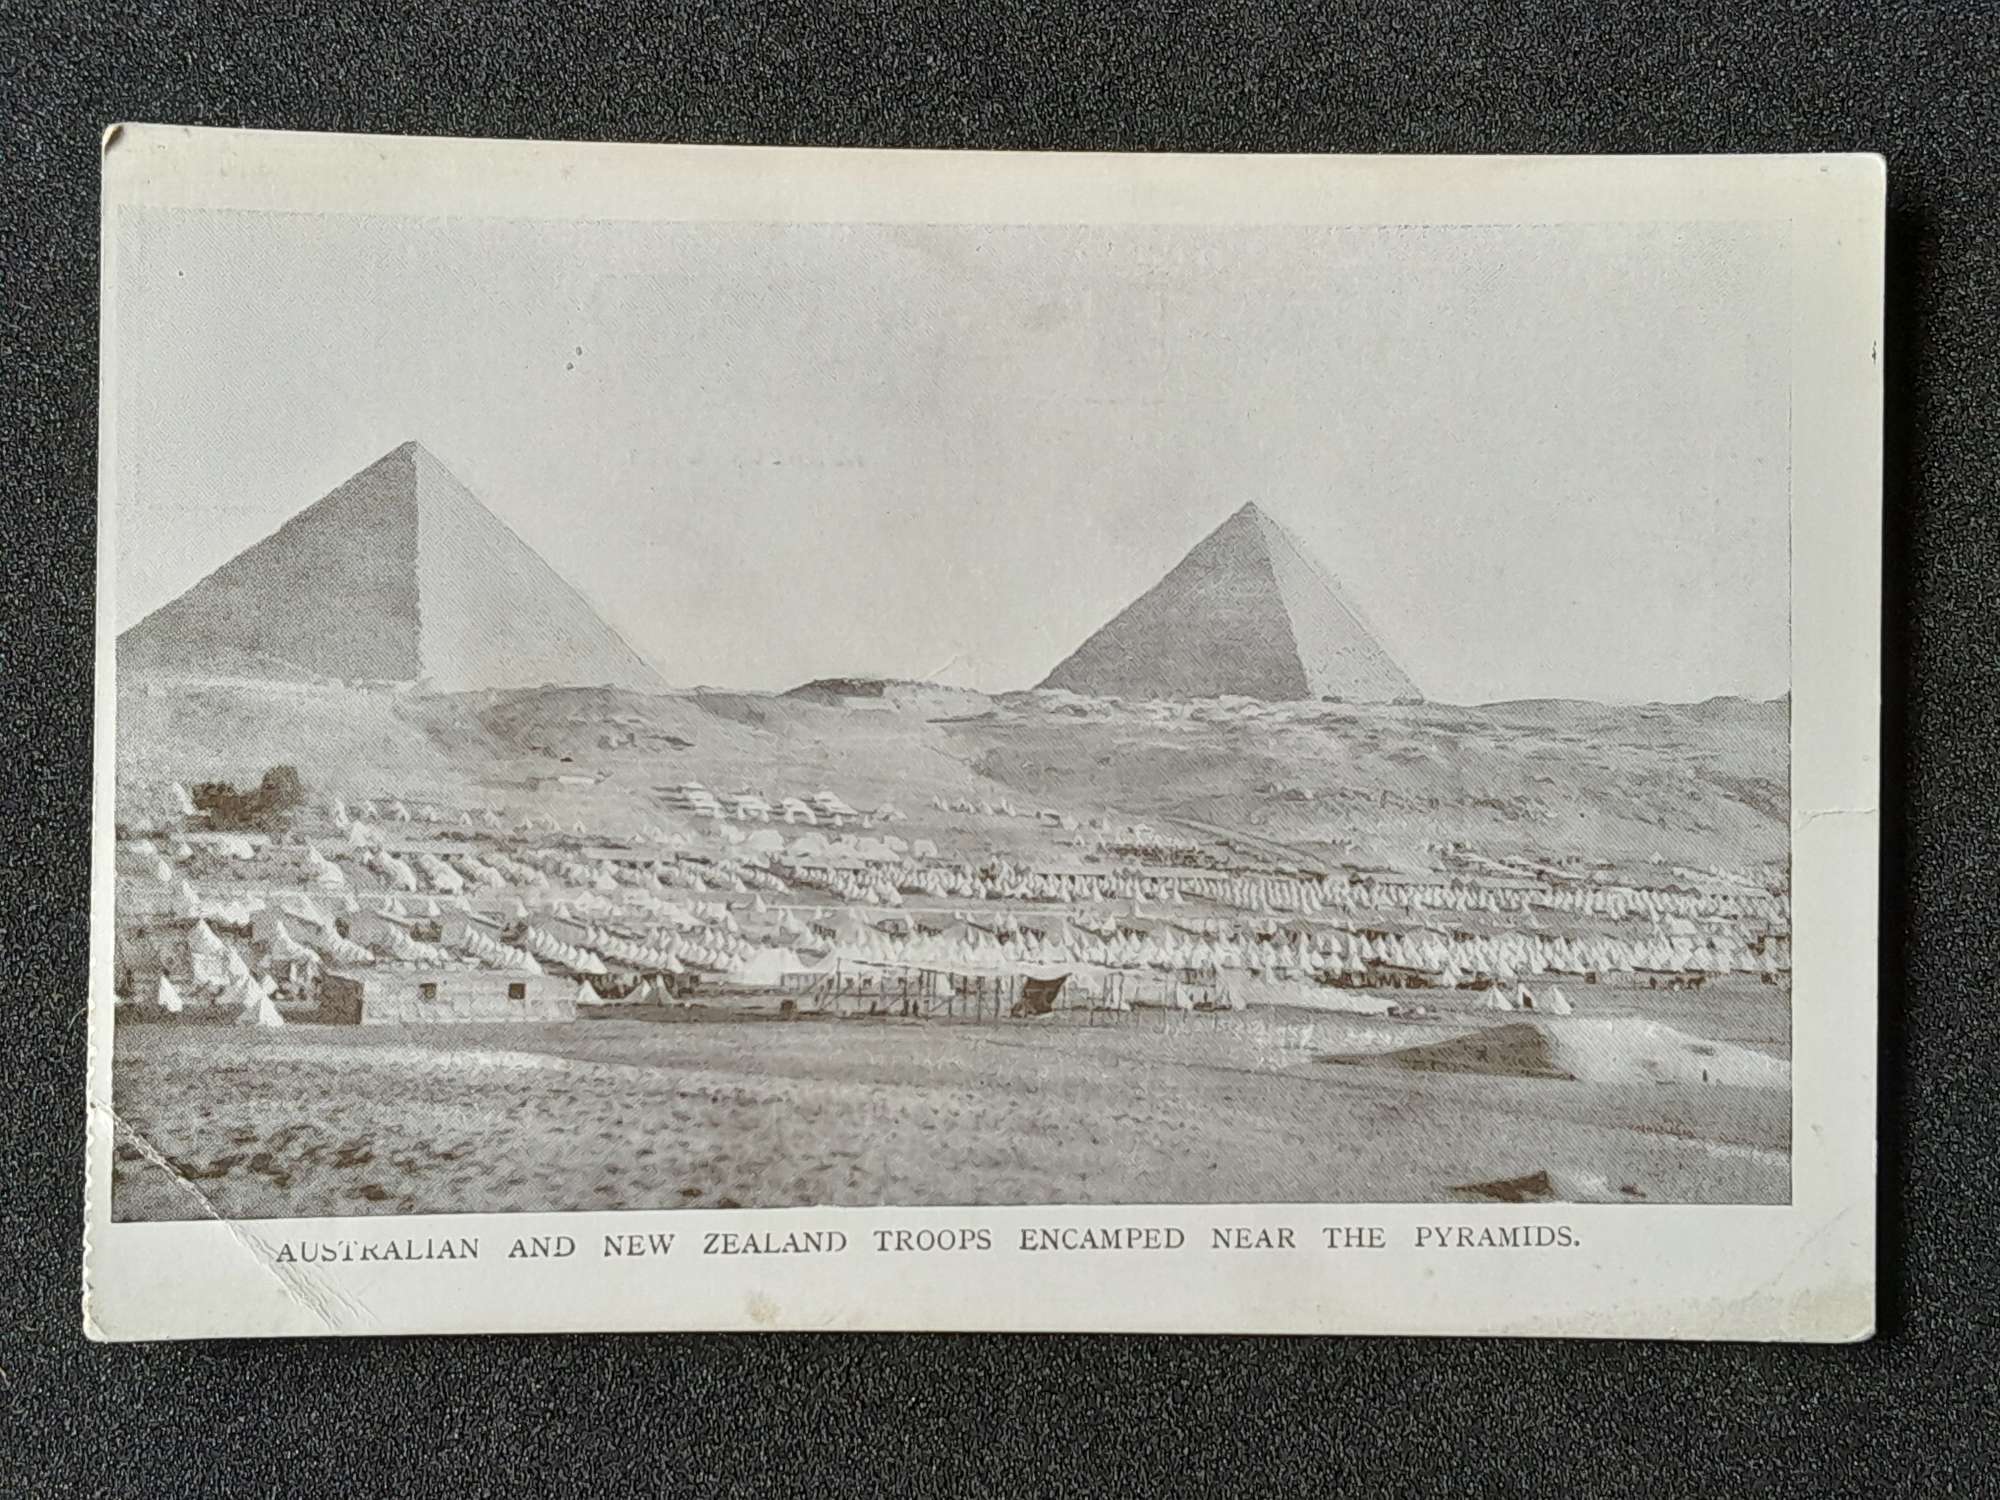 Australian and New Zealand Troops and Encamped near the Pyramids